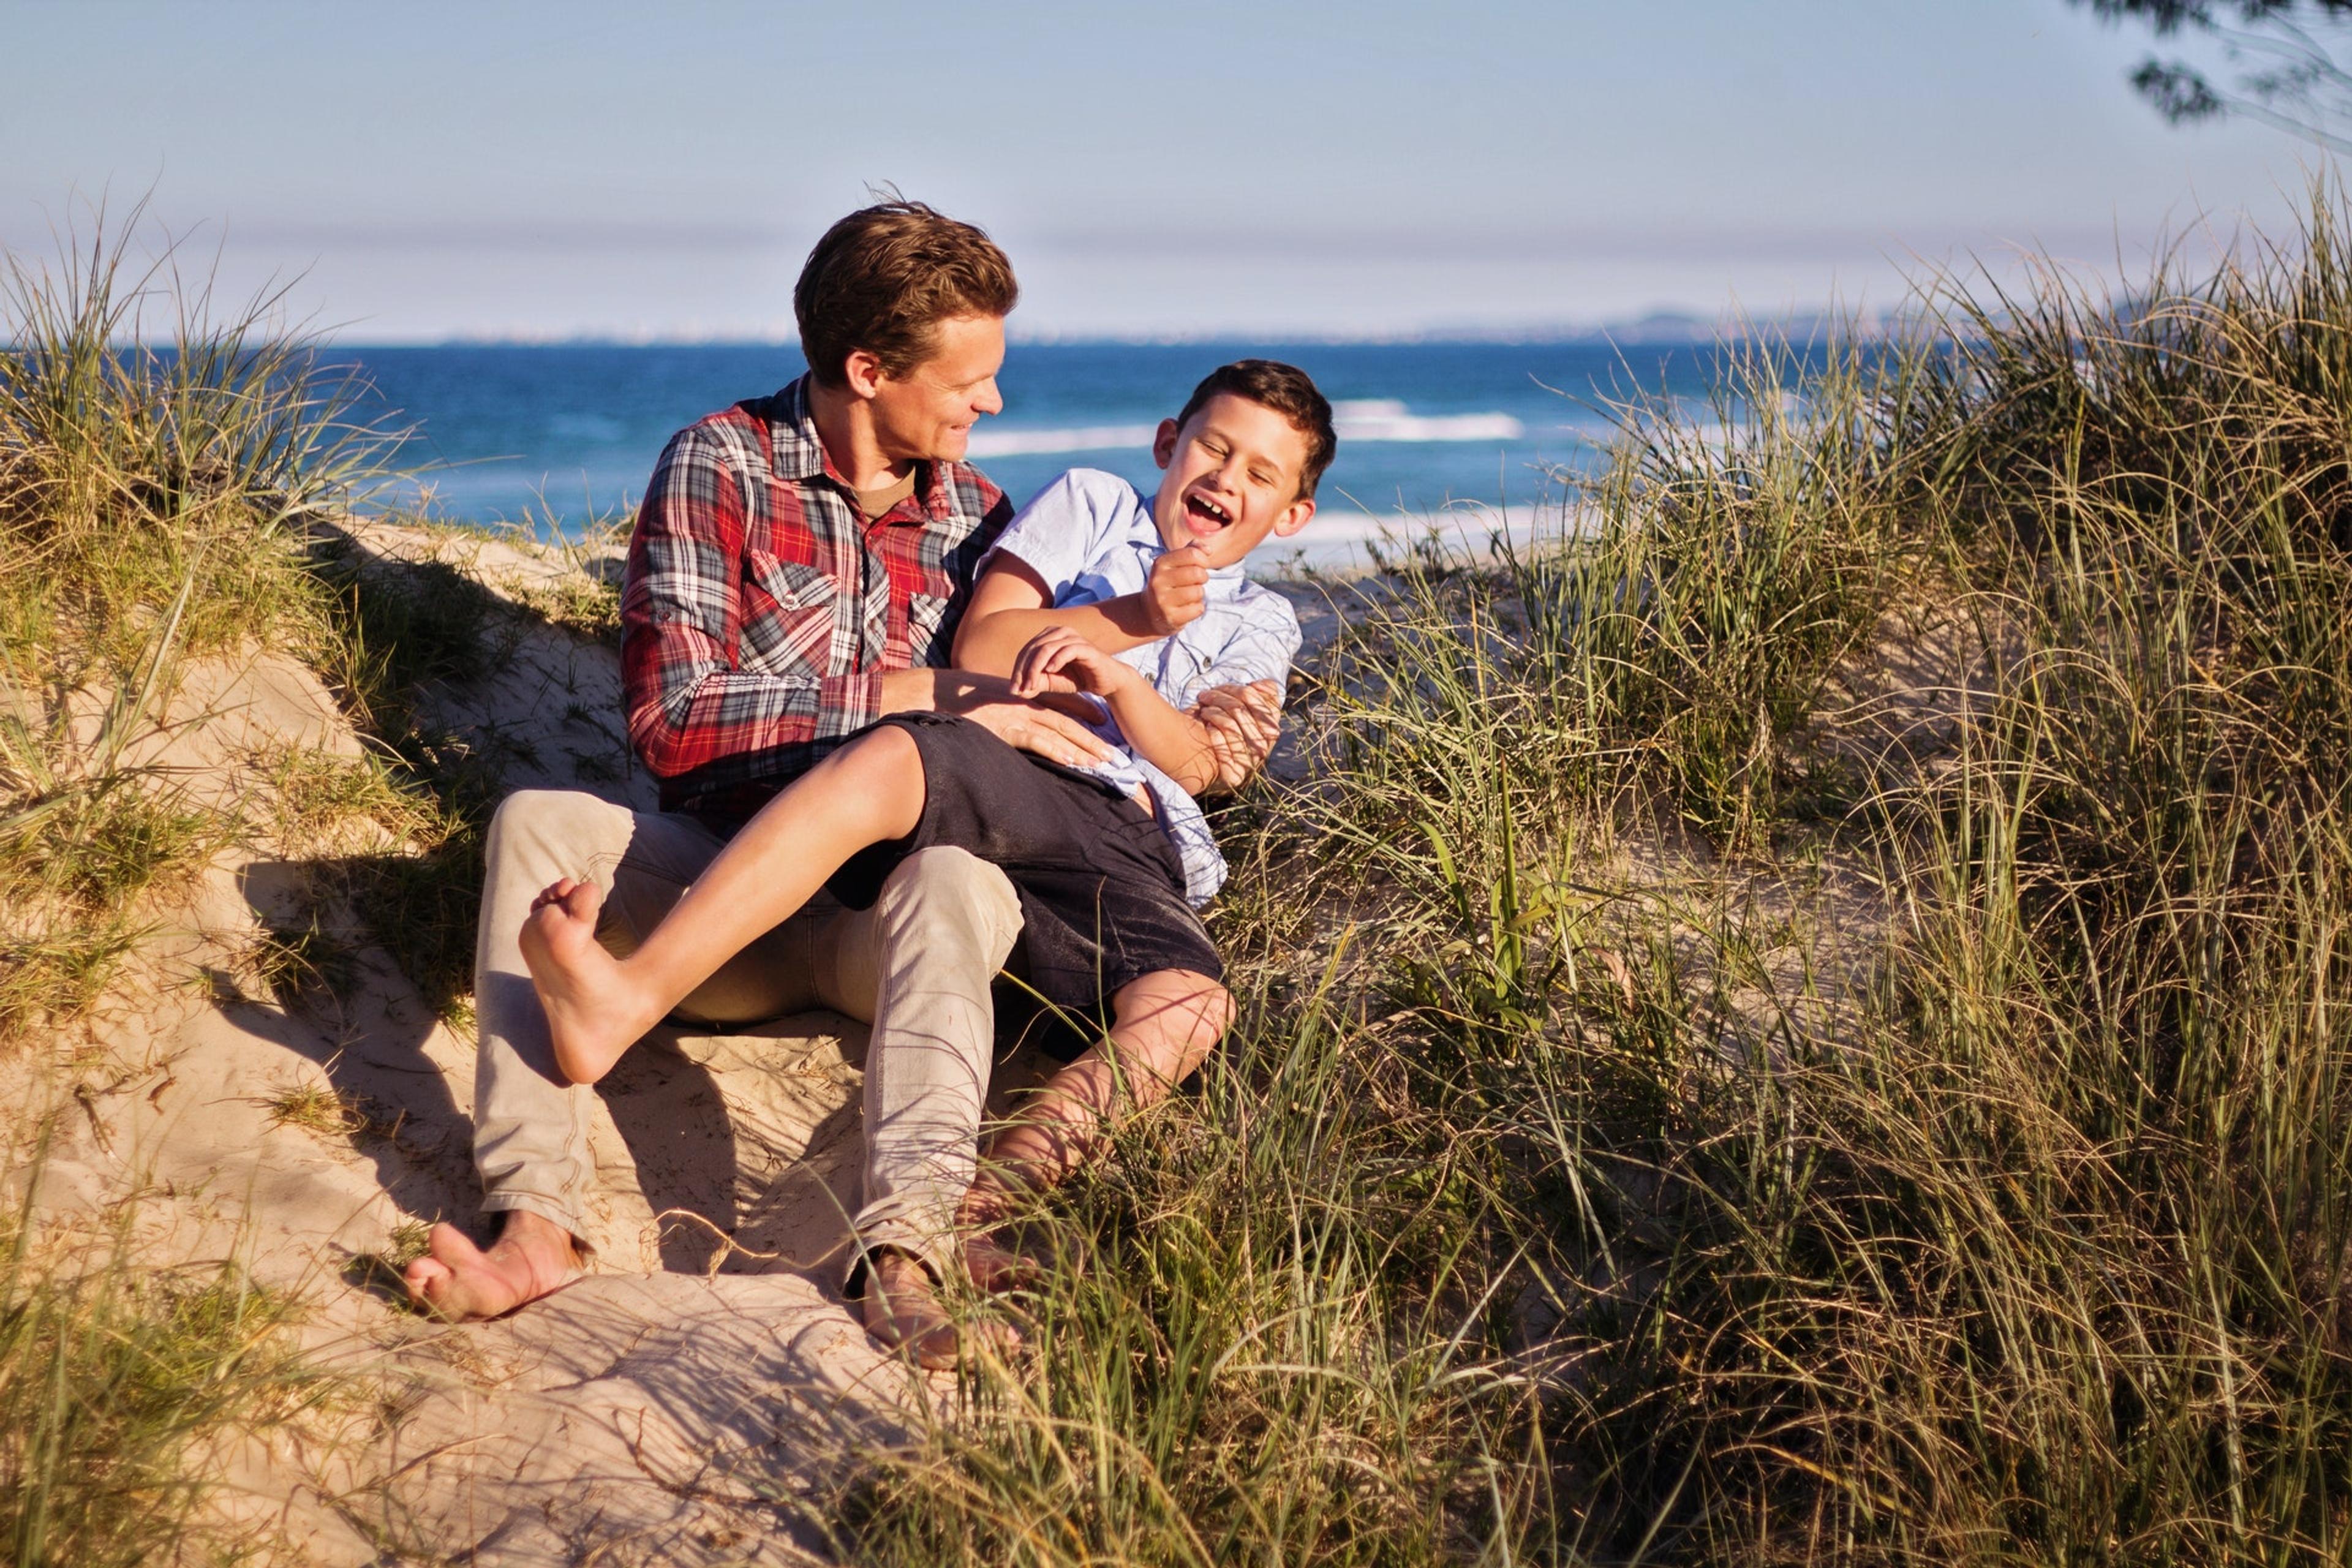 A man and a young boy laugh while sitting together on a sand dune